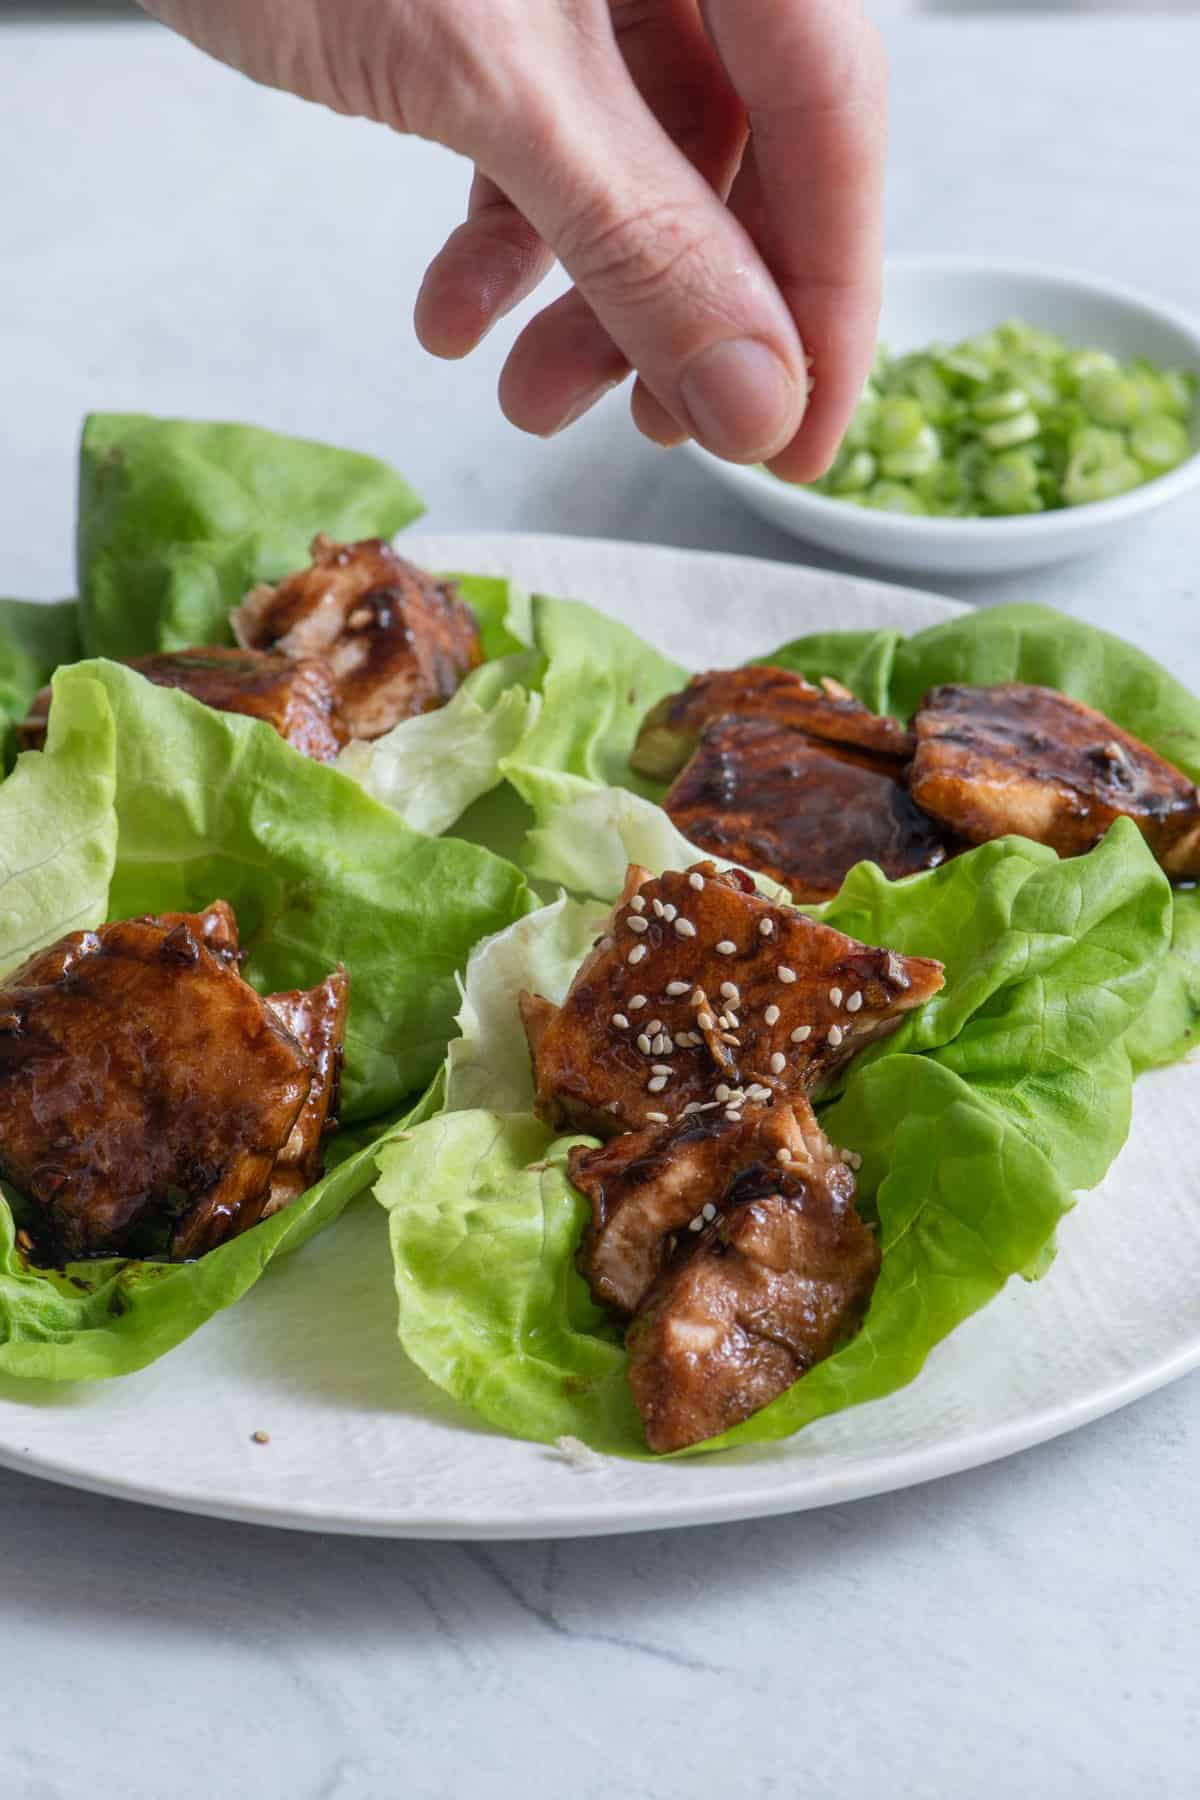 Four pieces of Bibb lettuce each with chunks of salmon and a hand garnishing with sesame seeds.